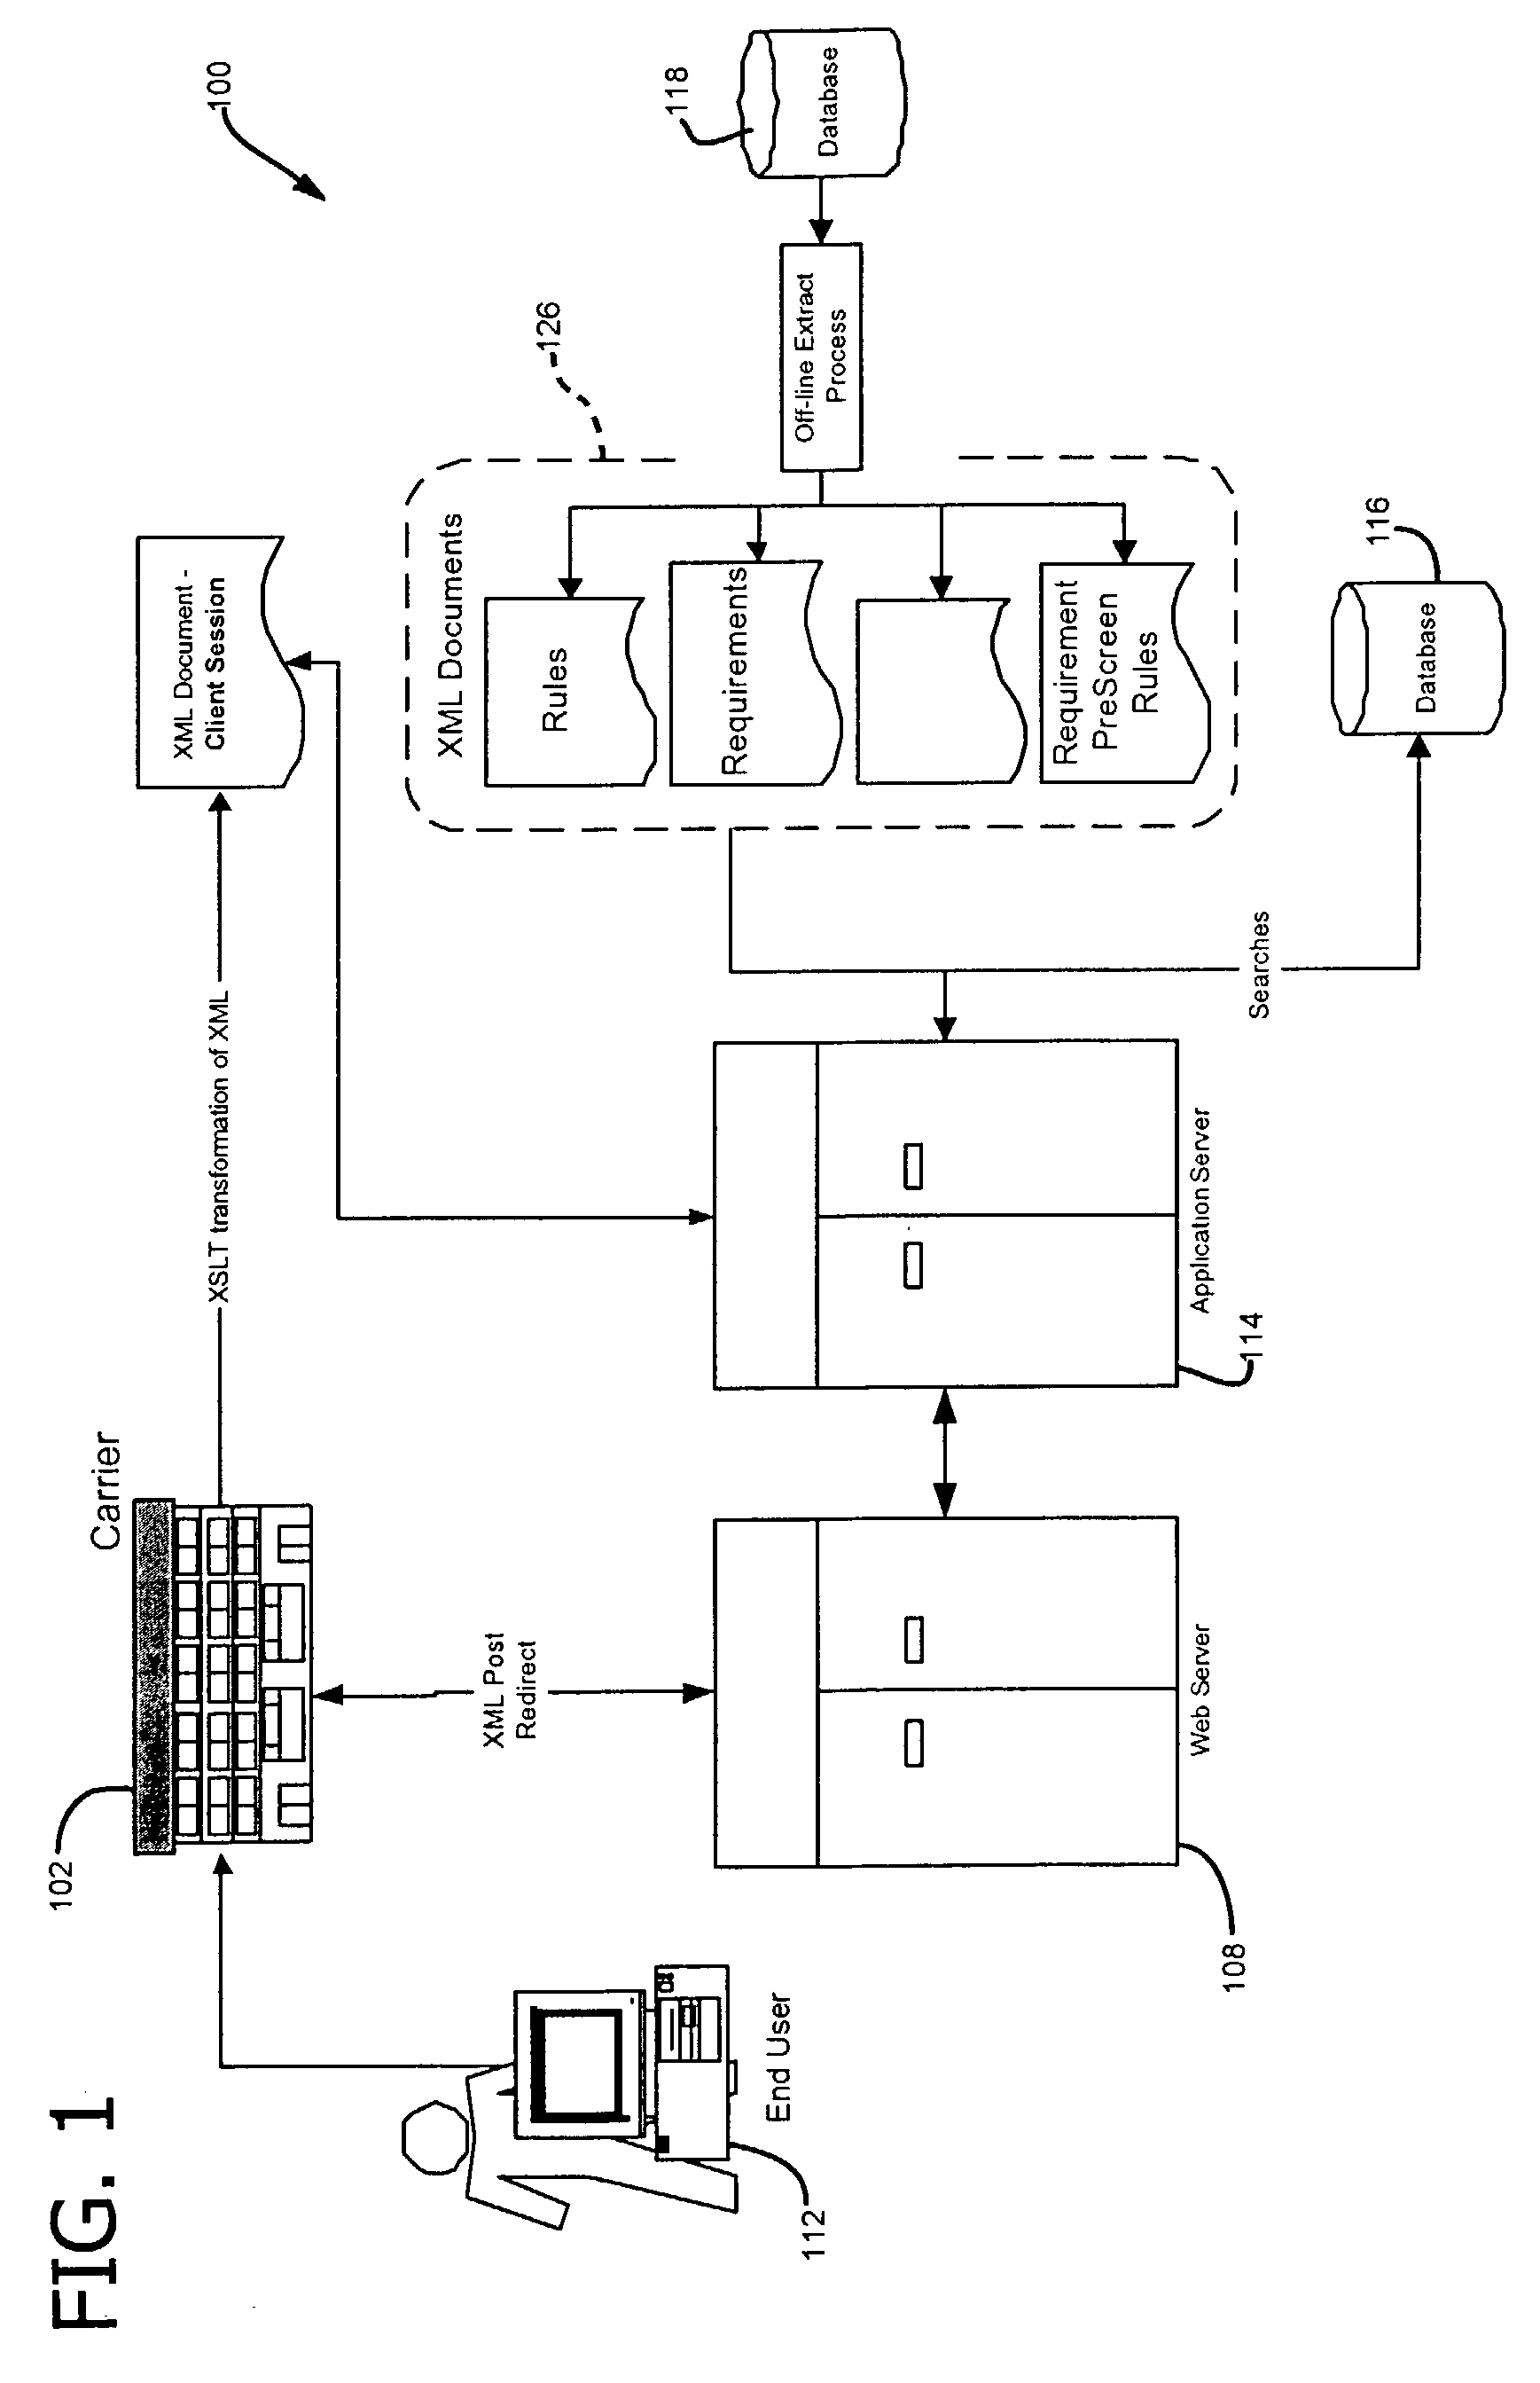 Computerized system and method of performing insurability analysis